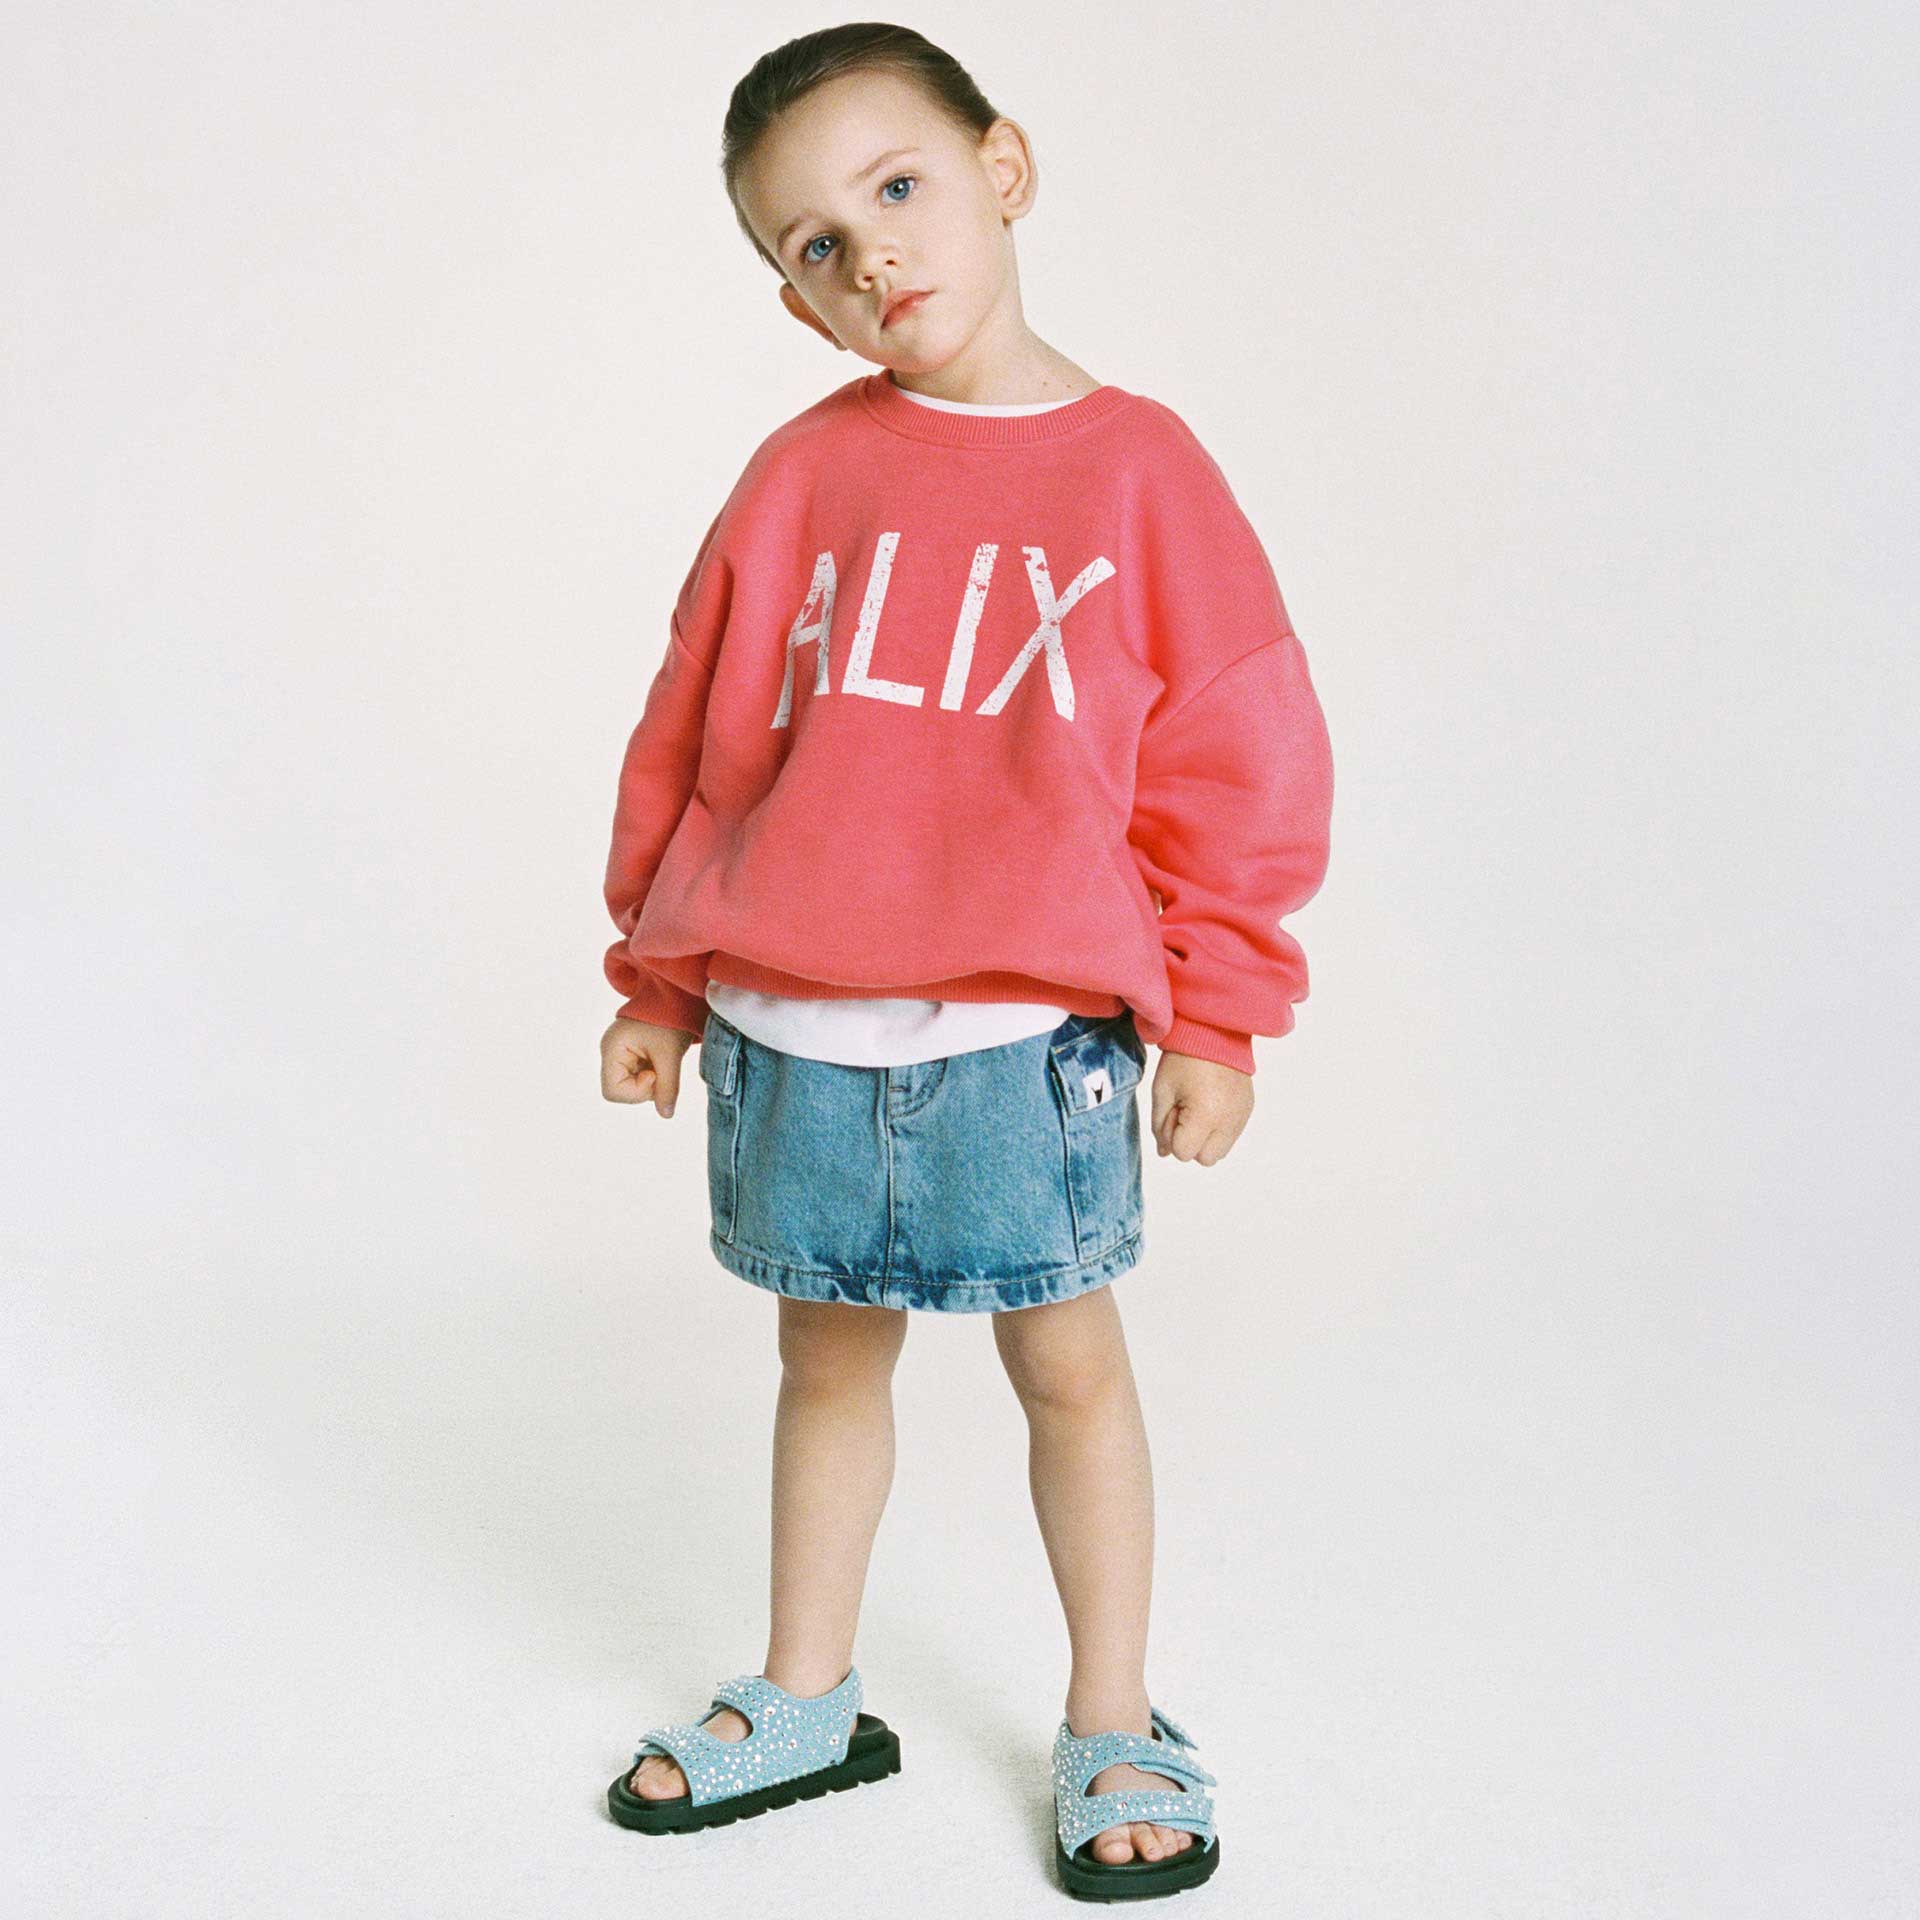 Alix Sweater knitted 3